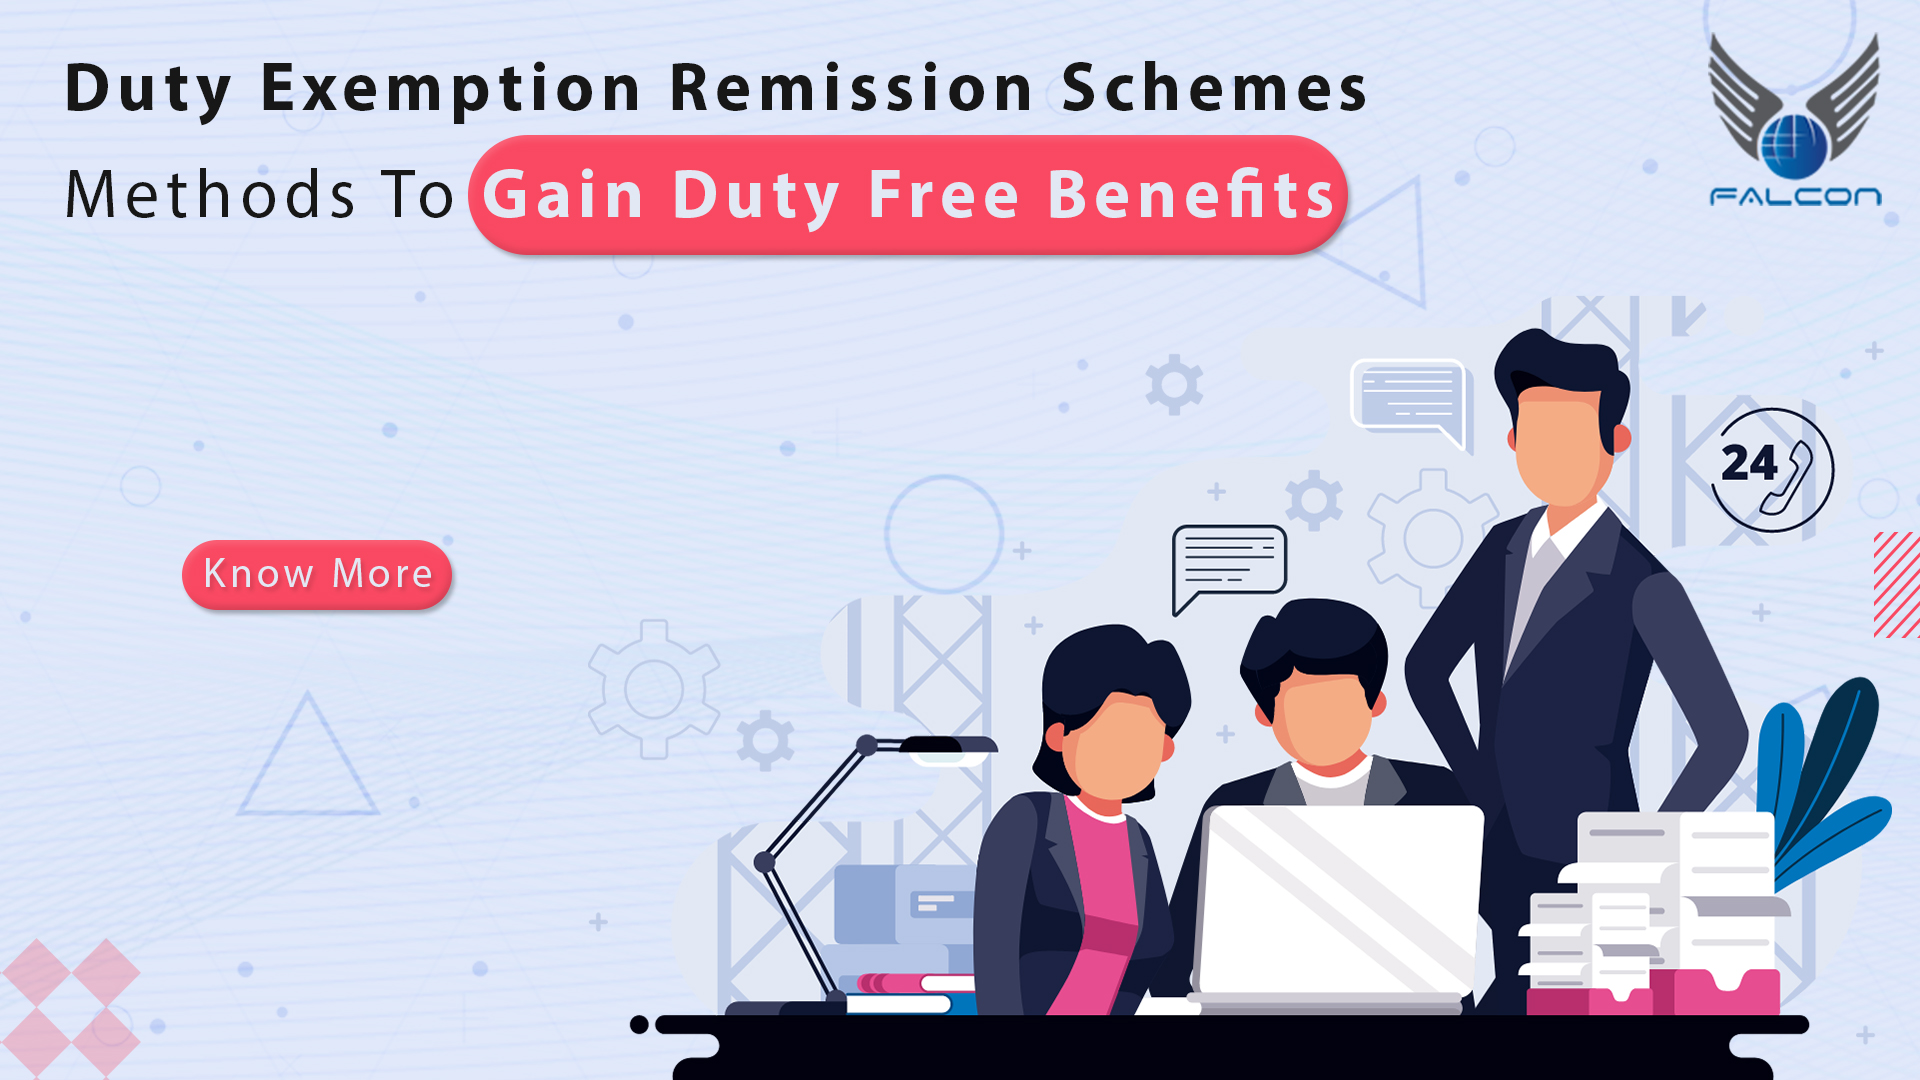 What is Duty Exemption Remission Schemes